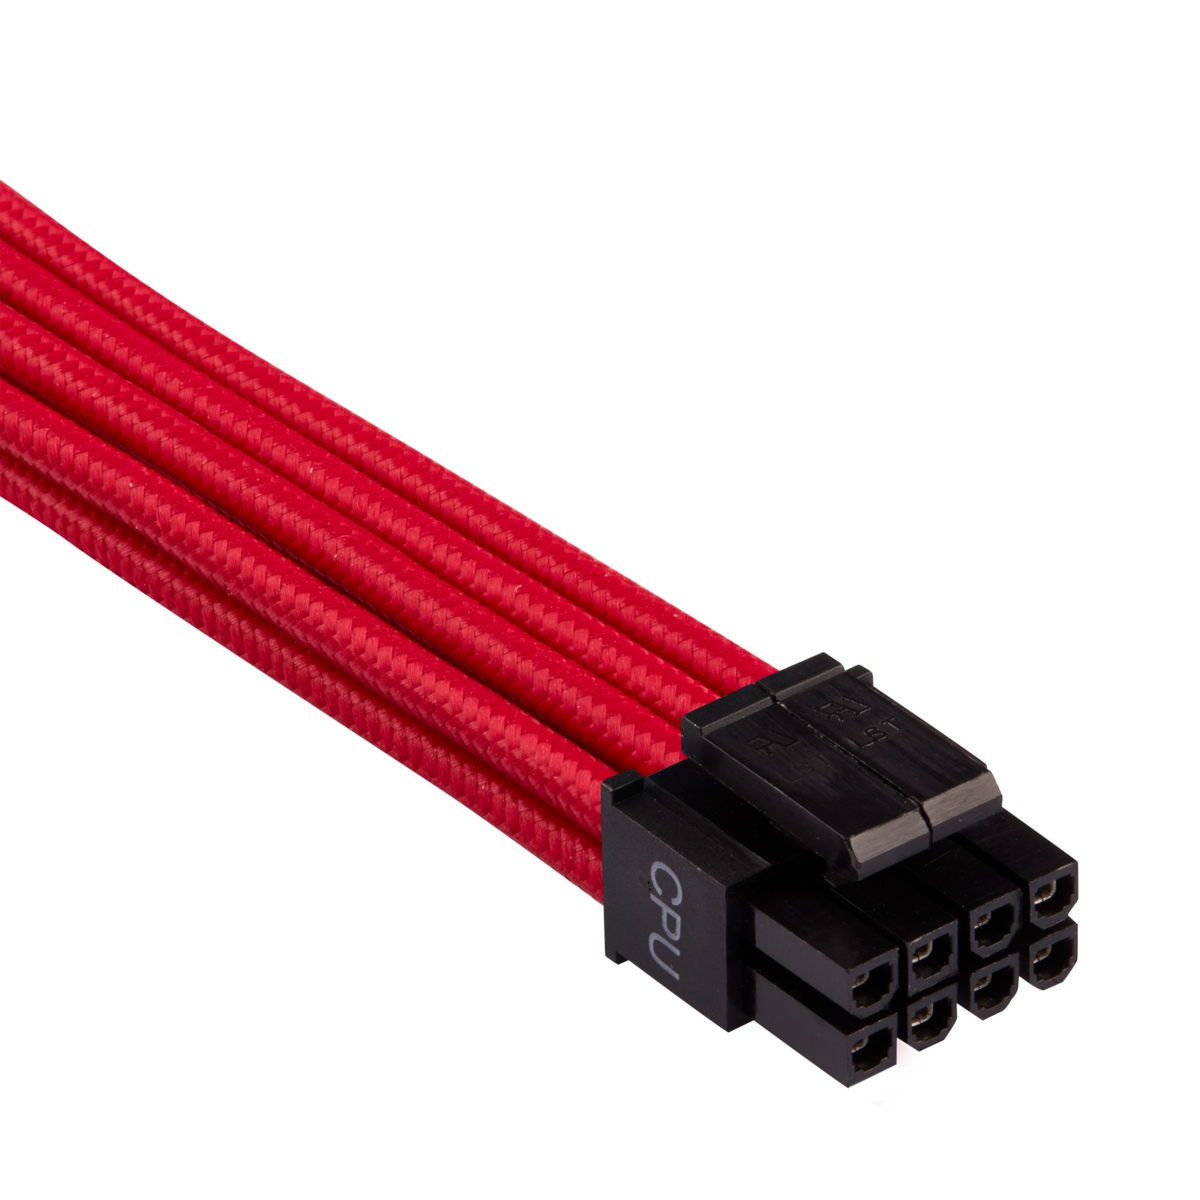 Corsair Individually Sleeved PSU Cables Starter Kit Type 4 Gen 4 Power Cable - Red